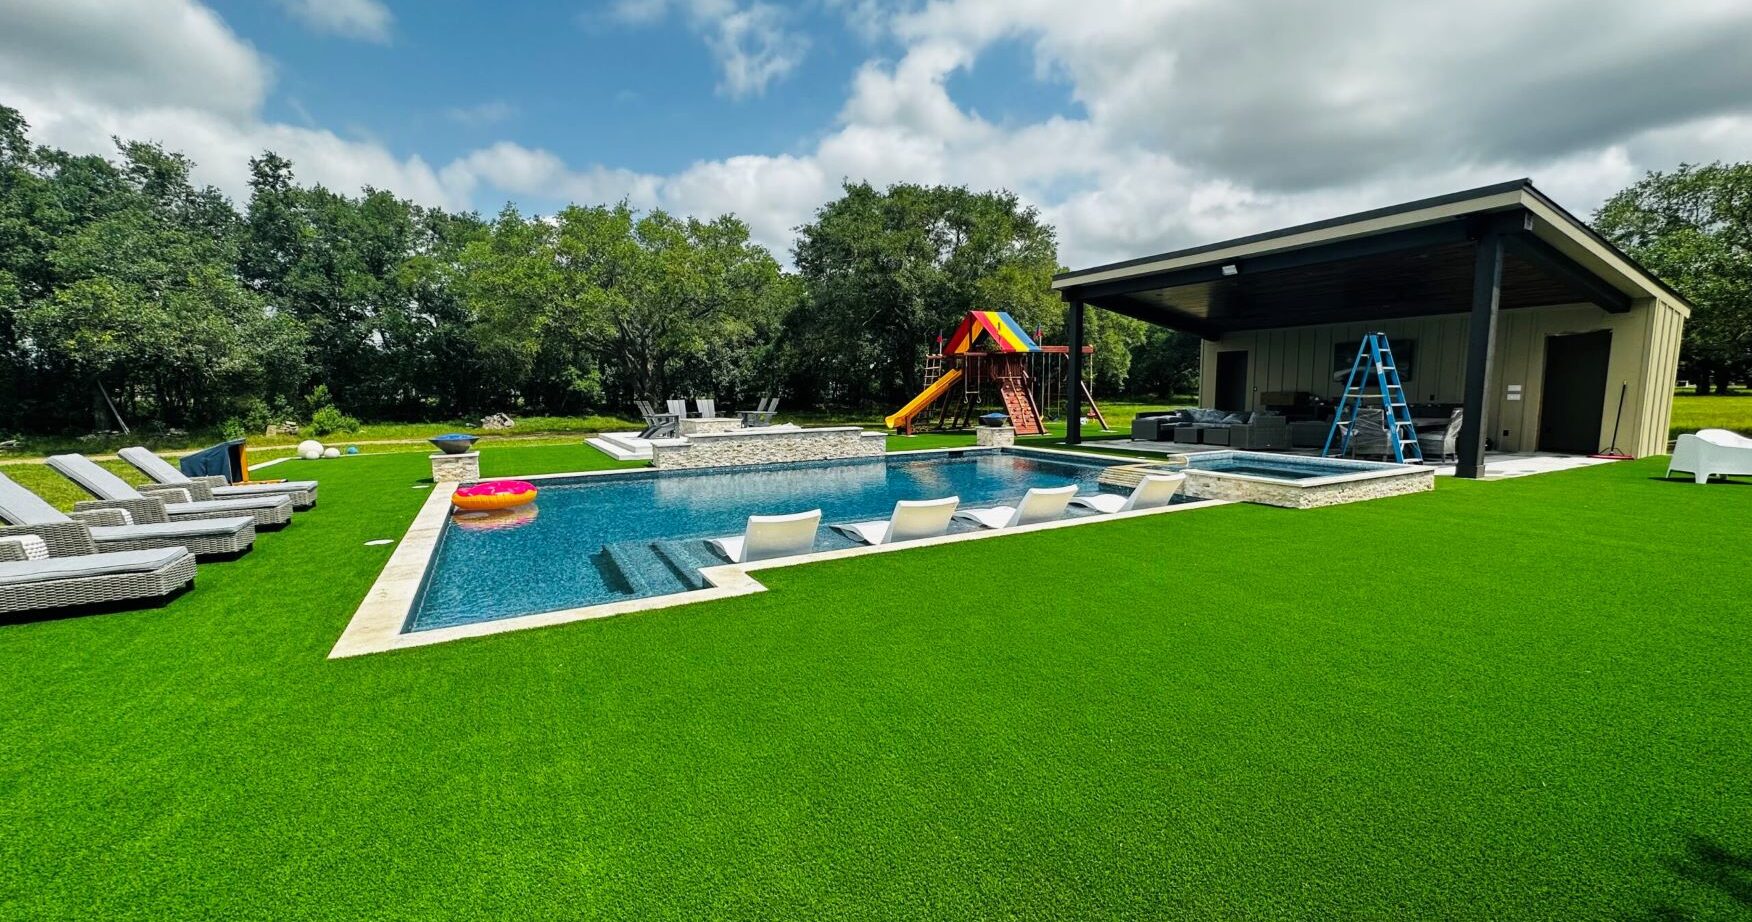 You are currently viewing Create a poolside oasis in your backyard with Artificial Grass.